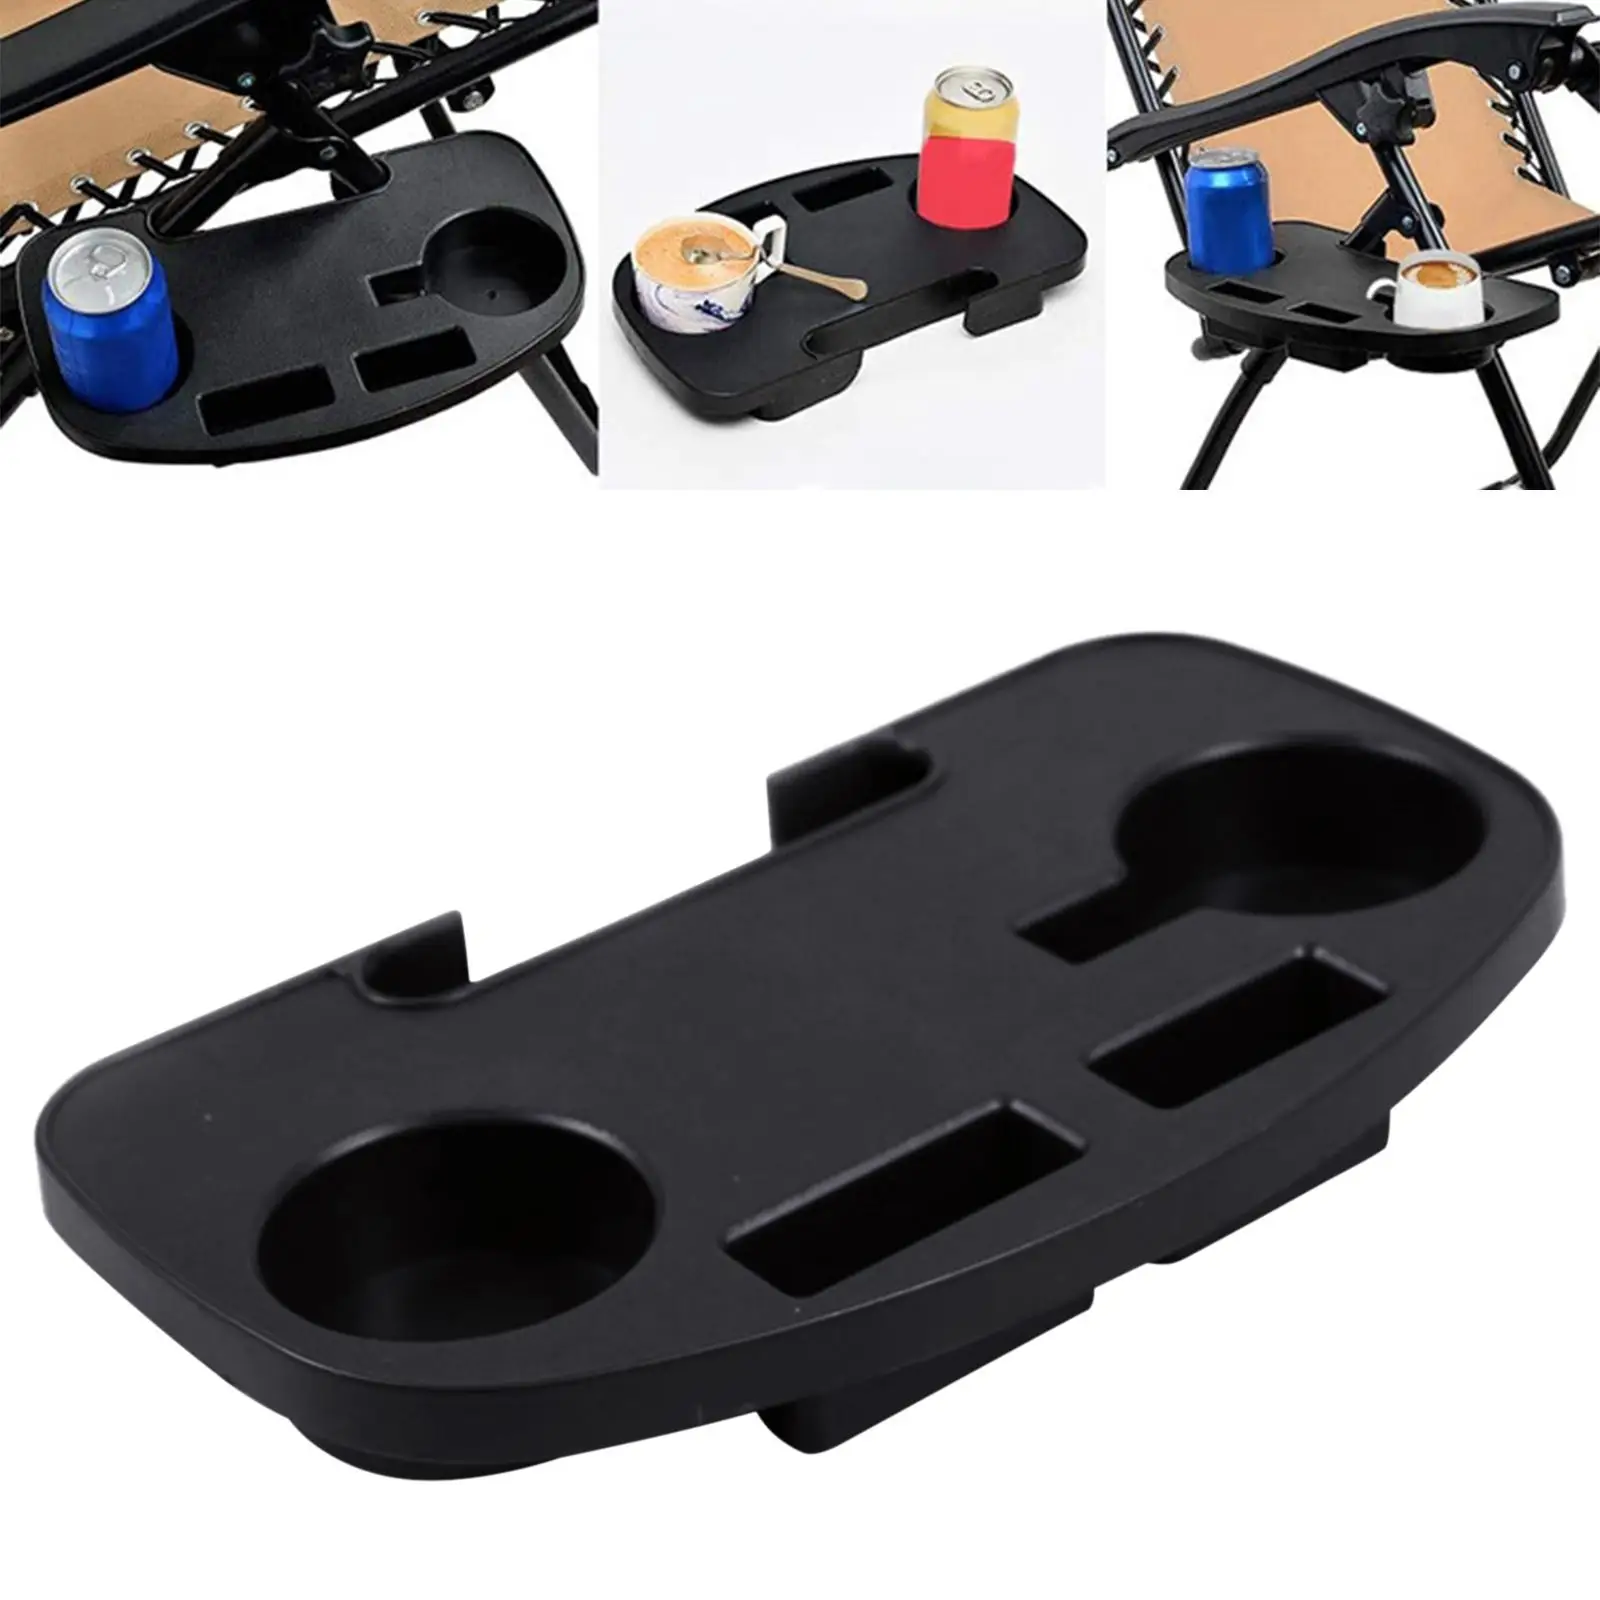 Recliner Side Table Cup Holder Tray Folding Reclining Chairs with Mobile Phone Slot for Sun Lounger Hiking Fishing Camping Beach